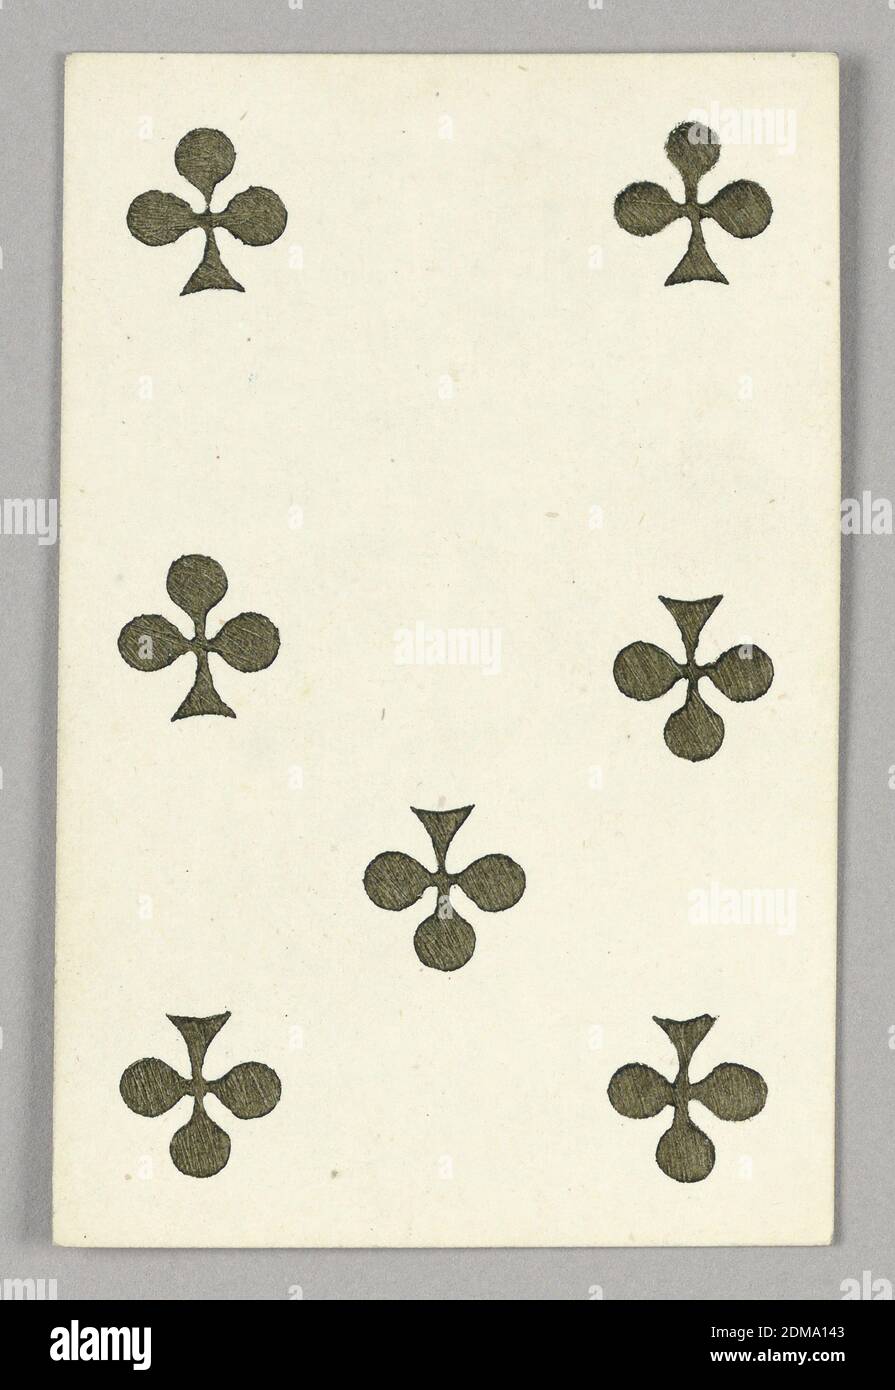 Seven of Clubs from Set of 'Jeu Imperial–Second Empire–Napoleon III' Playing Cards, F. Chardon, French, active 19th c., Lithograph on glazed paper, Seven of Clubs from Set of 'Jeu Imperial–Second Empire–Napoleon III' Playing Cards., Paris, France, 1858, Playing Card, Playing Card Stock Photo